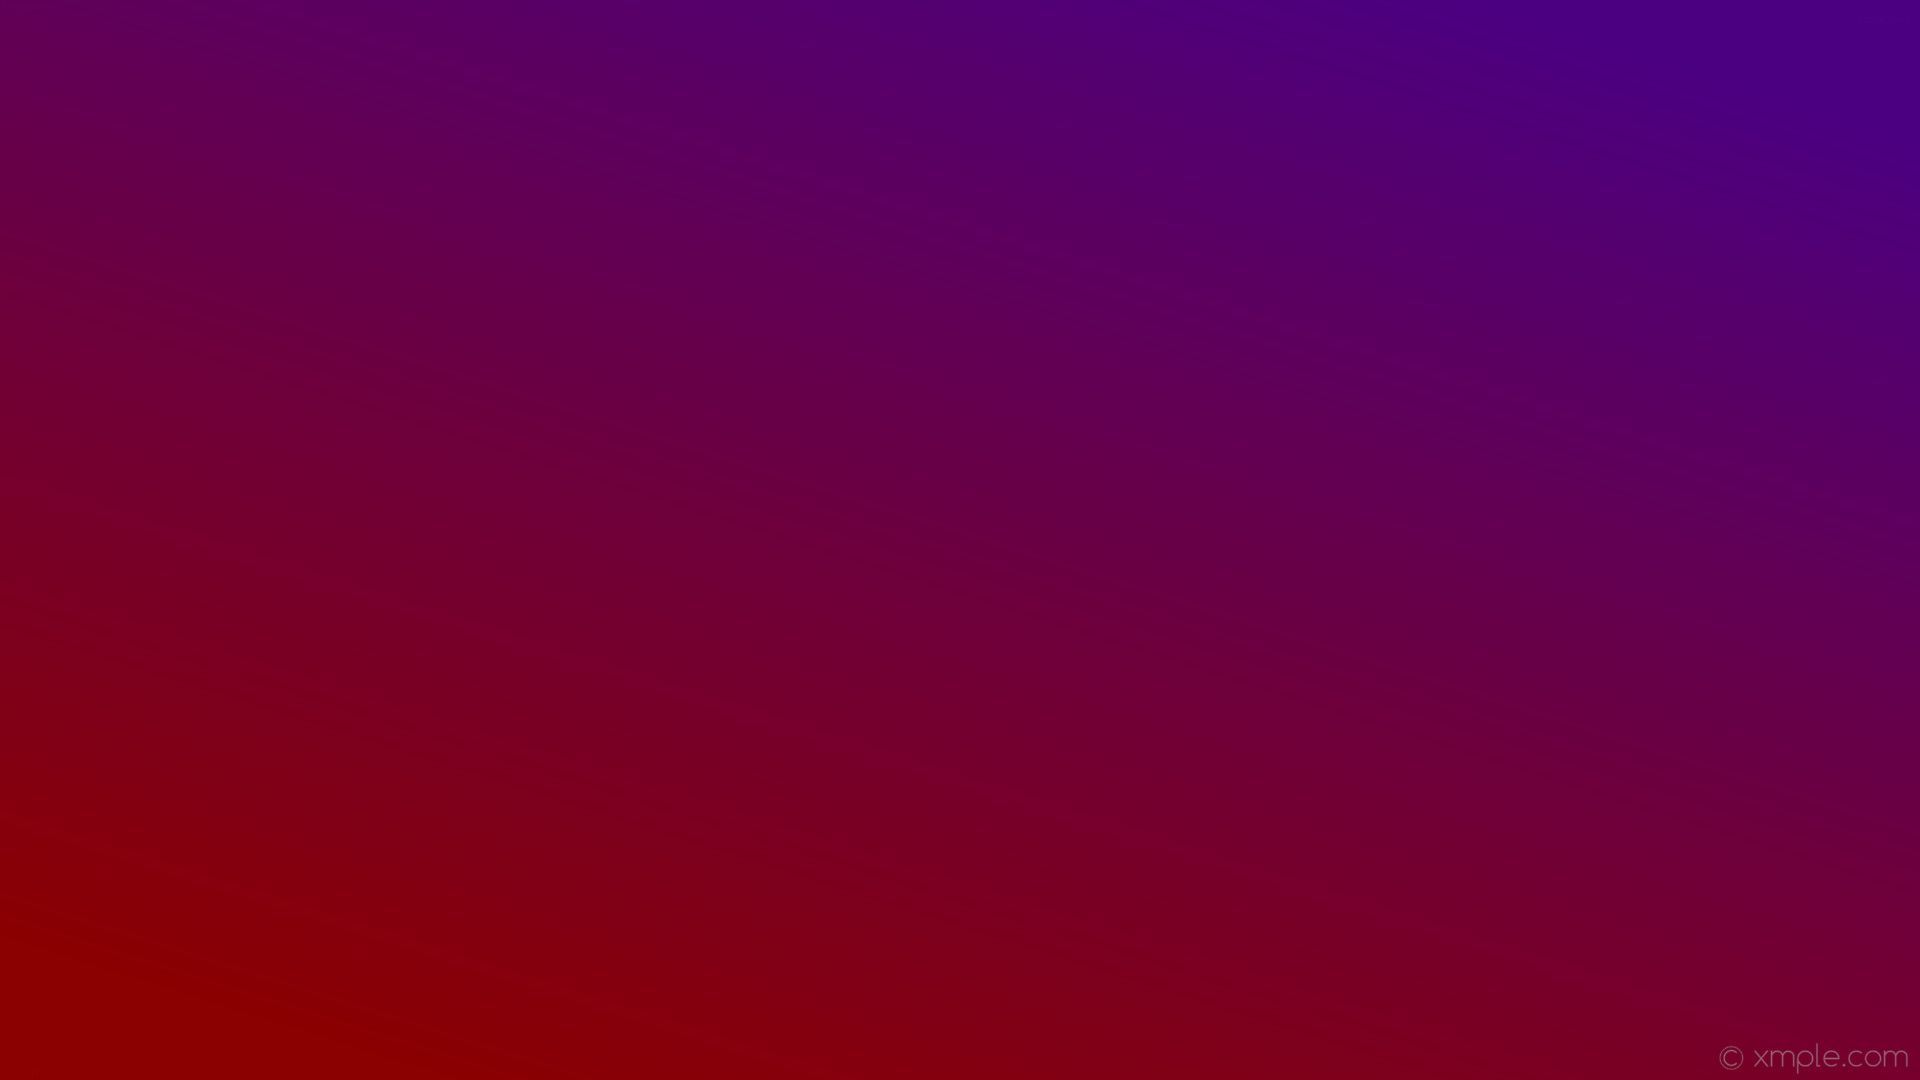 Red And Purple Wallpapers